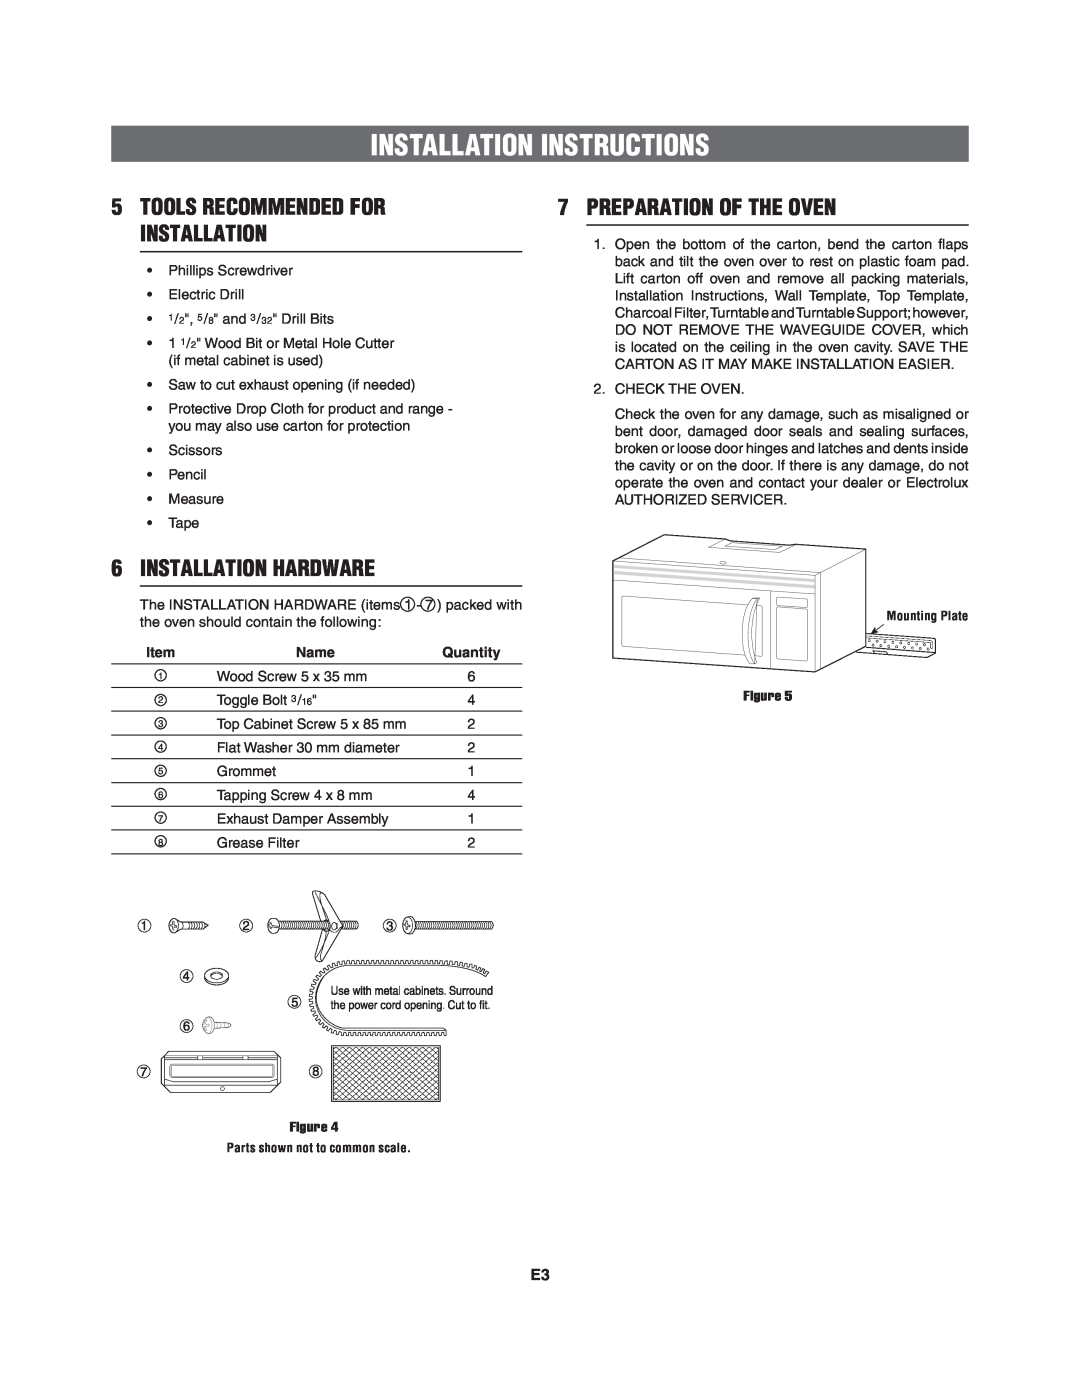 Frigidaire 316495062 Preparation Of The Oven, Installation Hardware, Tools Recommended For Installation, Name, Quantity 